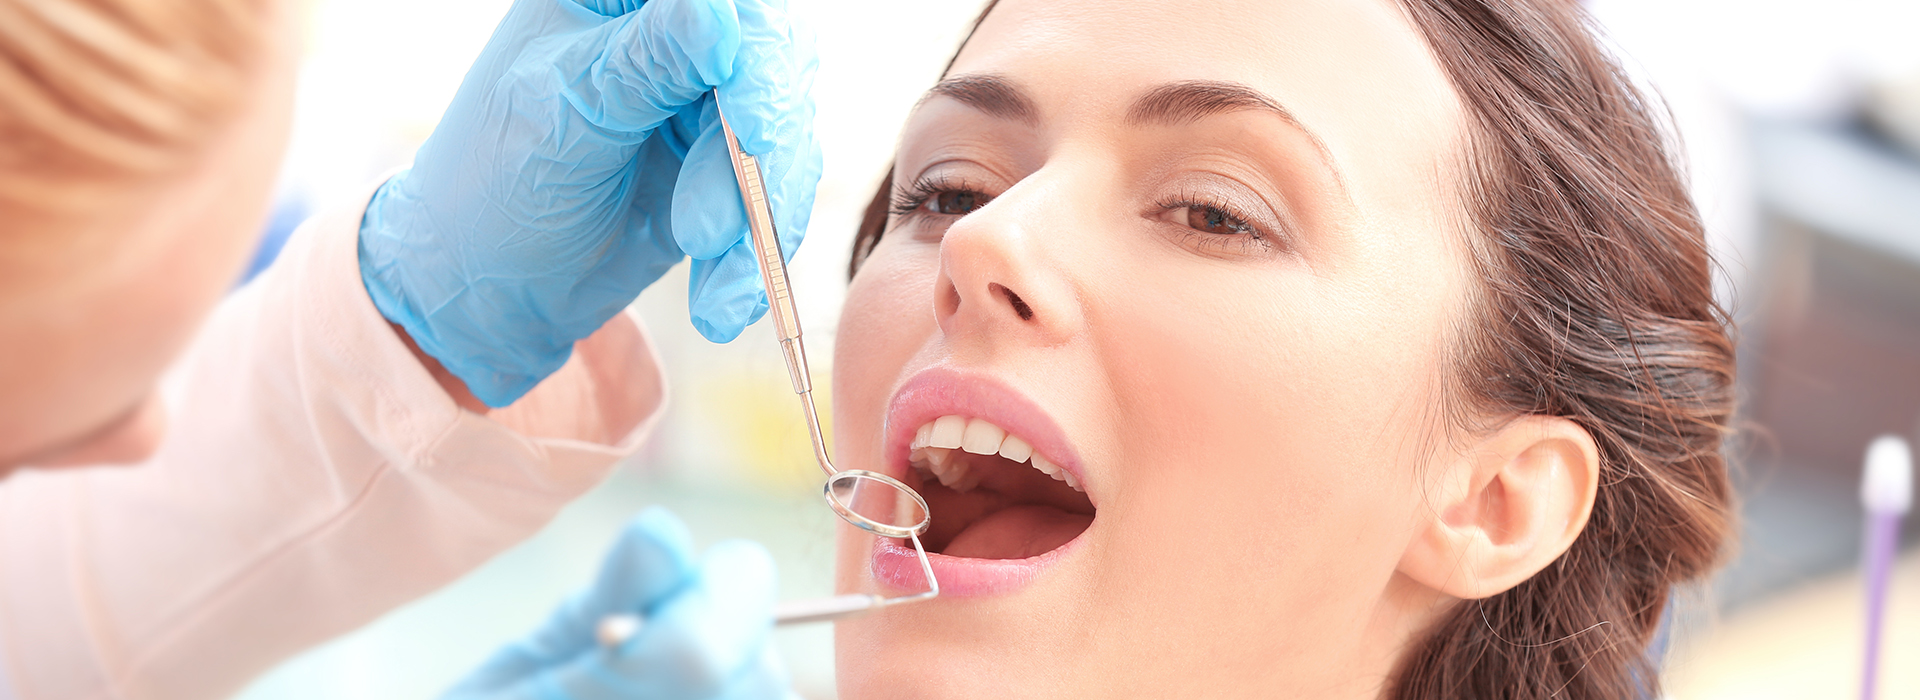 GD Dentistry | Ceramic Crowns, Dental Fillings and Night Guards